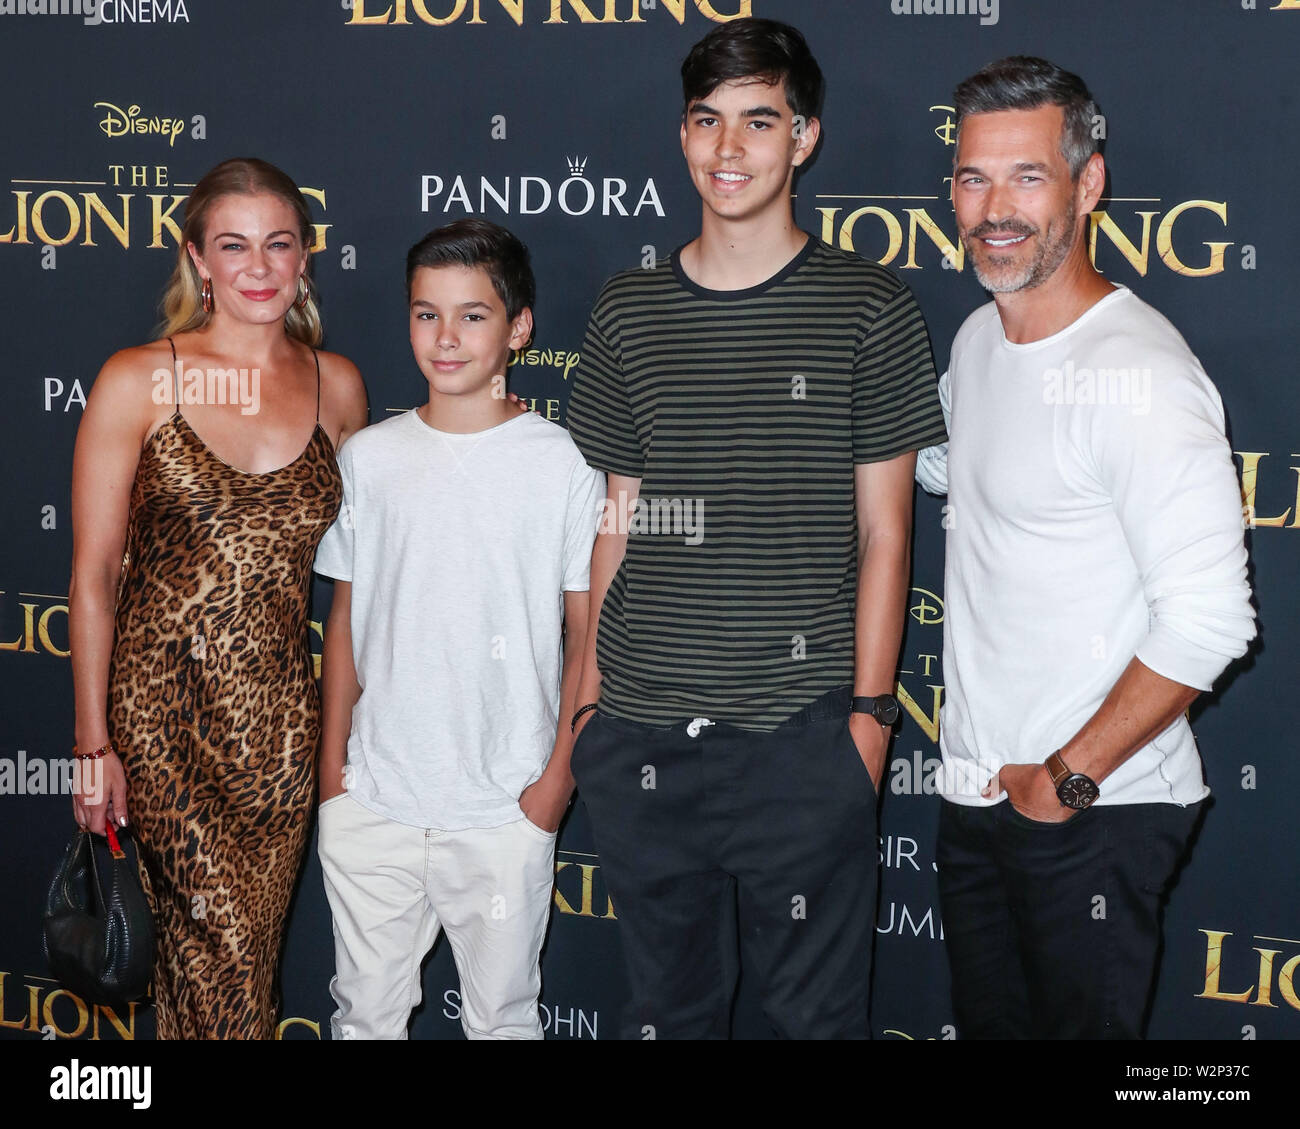 HOLLYWOOD, LOS ANGELES, CALIFORNIA, USA - JULY 09: LeAnn Rimes, Jake Austin Cibrian, Mason Edward Cibrian and Eddie Cibrian arrive at the World Premiere Of Disney's 'The Lion King' held at the Dolby Theatre on July 9, 2019 in Hollywood, Los Angeles, California, United States. (Photo by Xavier Collin/Image Press Agency) Stock Photo